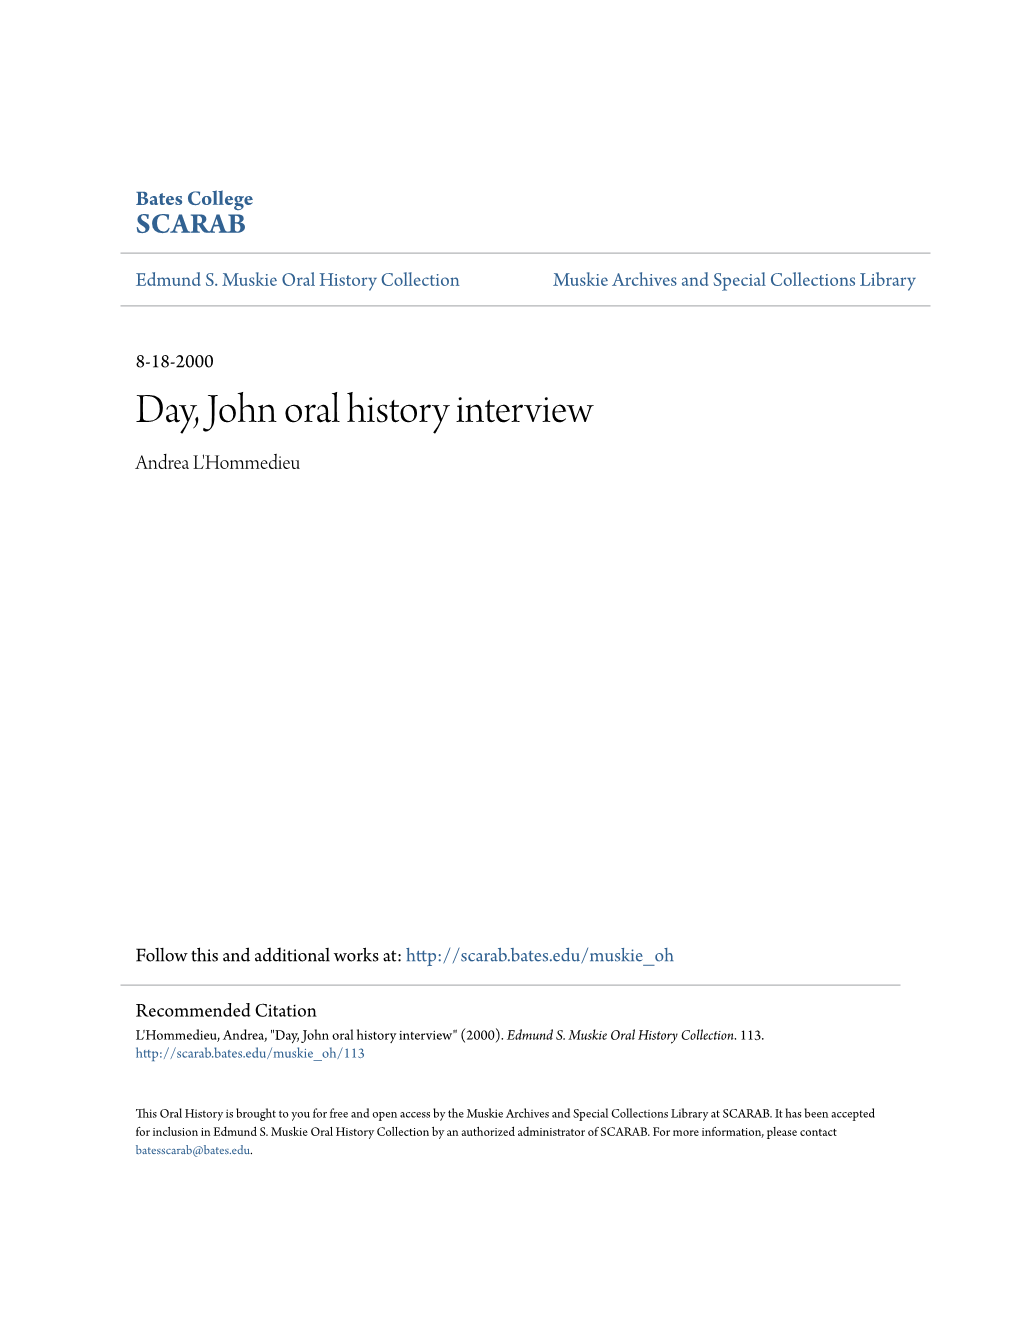 Day, John Oral History Interview Andrea L'hommedieu